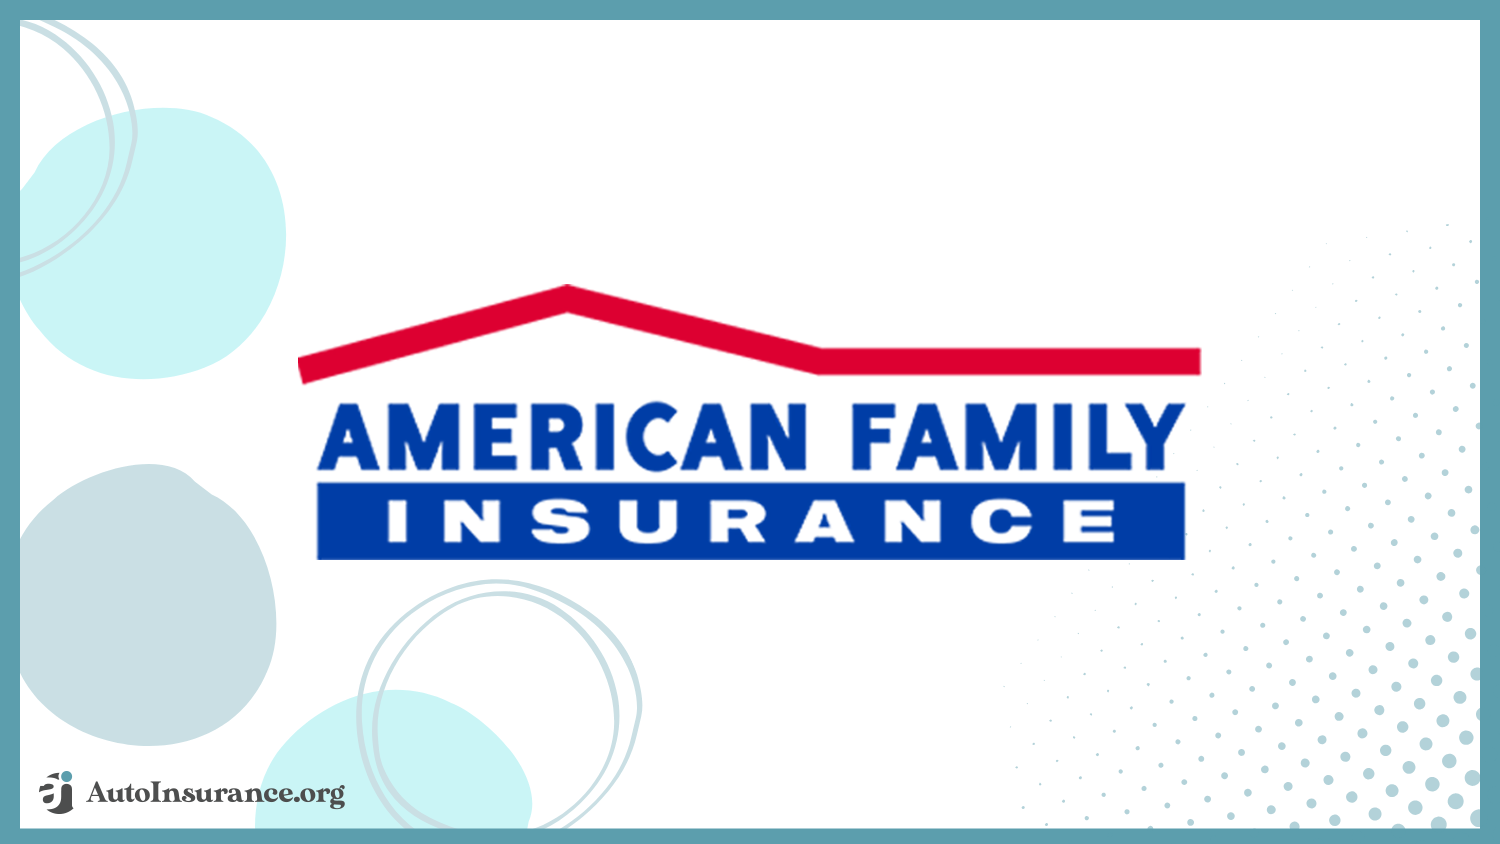 American Family: Best Auto Insurance for Drivers with Epilepsy